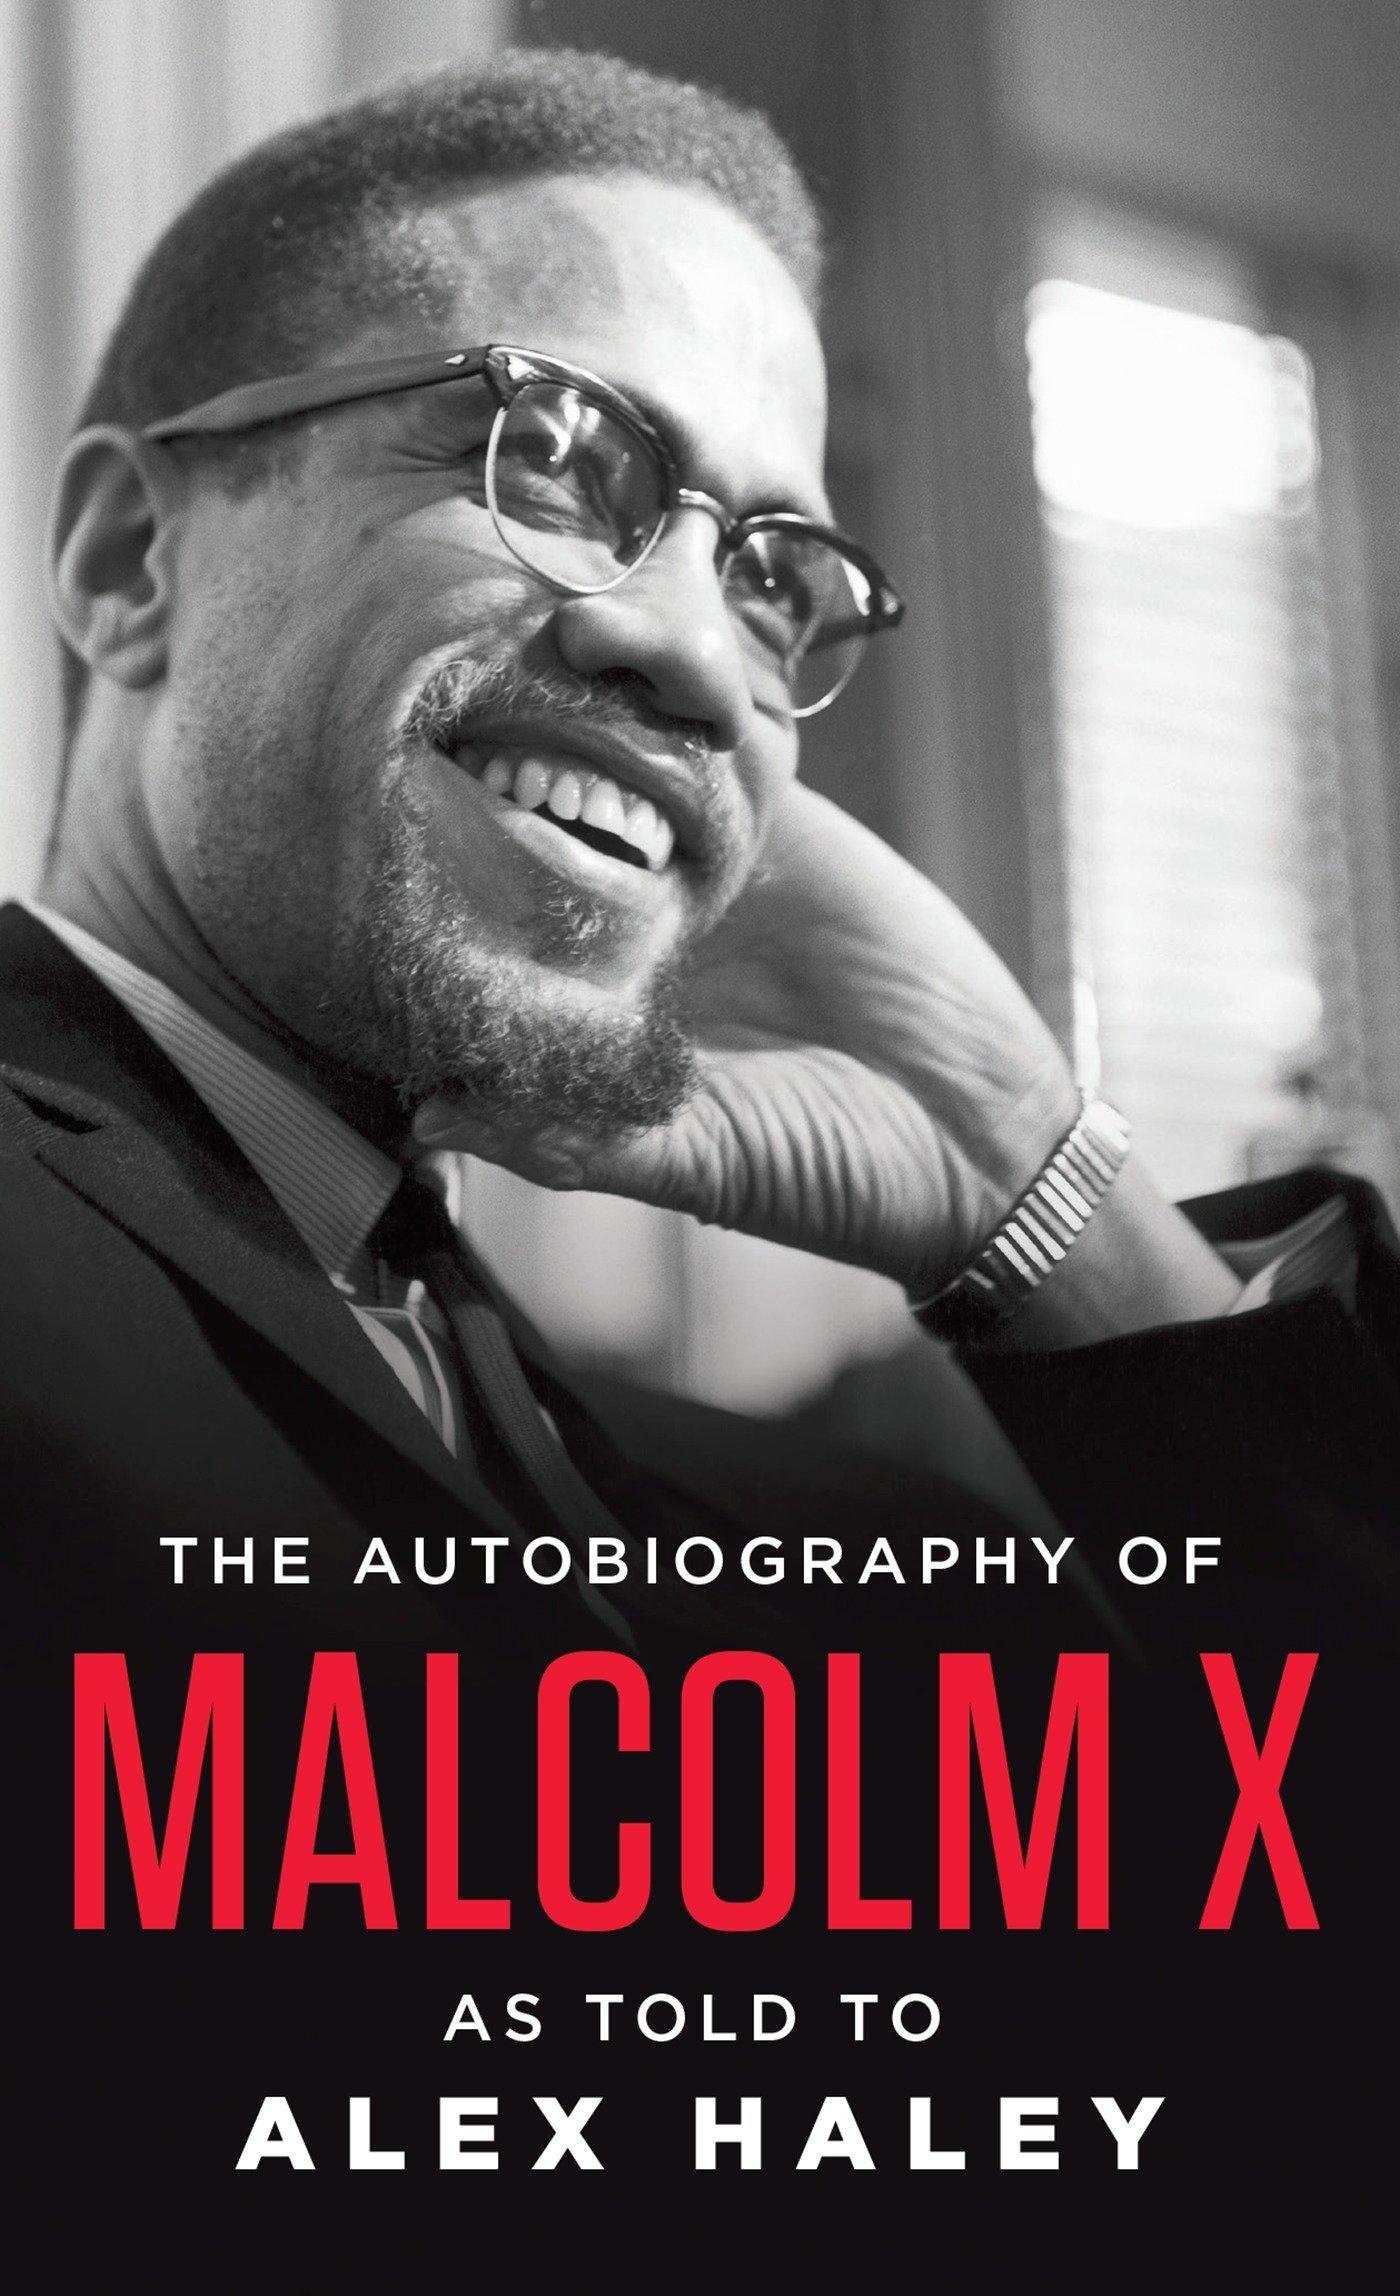 The Autobiography of Malcolm X book cover.